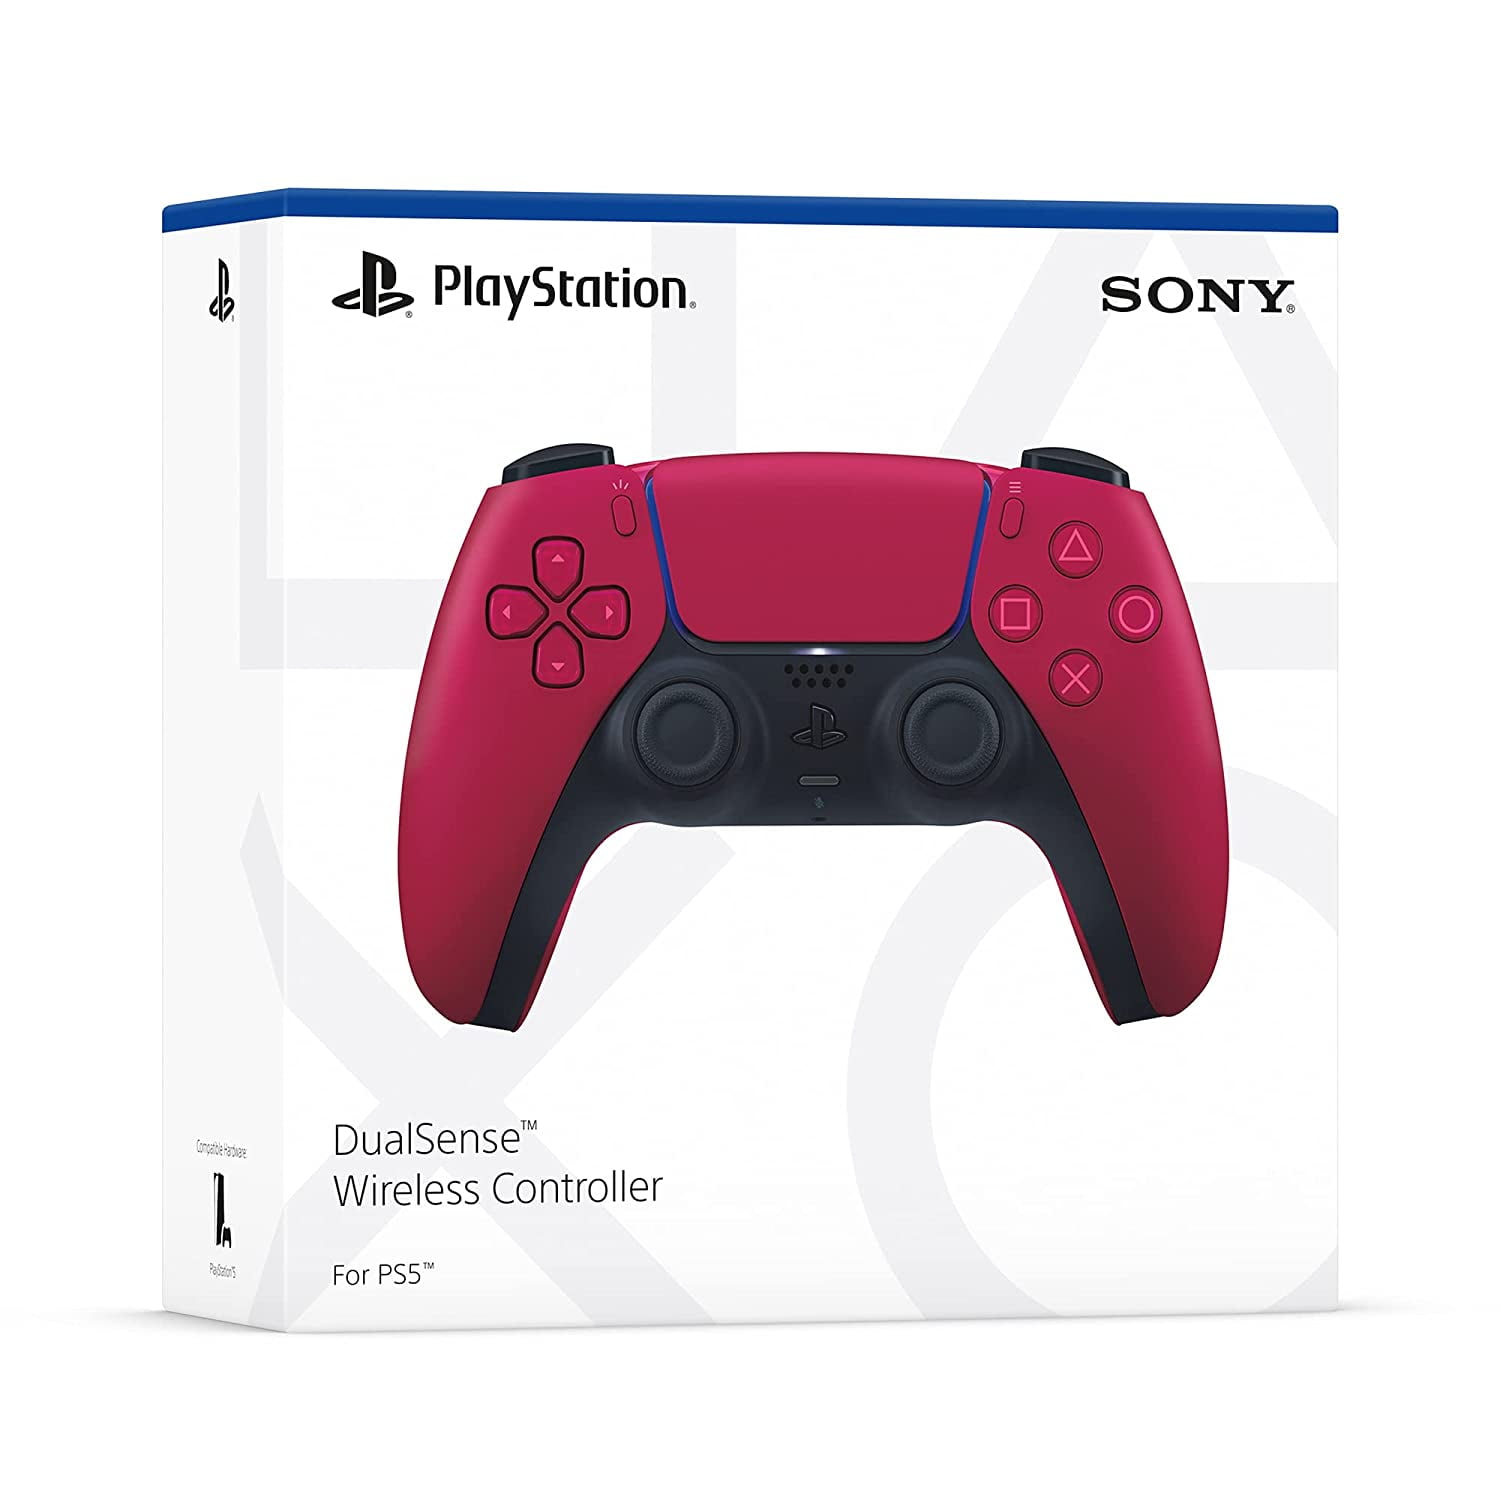 Sony Playstation 5 Disc Version Console w/ Extra PS5 DualSense Wireless  Controller & Mightyskins Custom Skin Code Vouchers - Bundle 